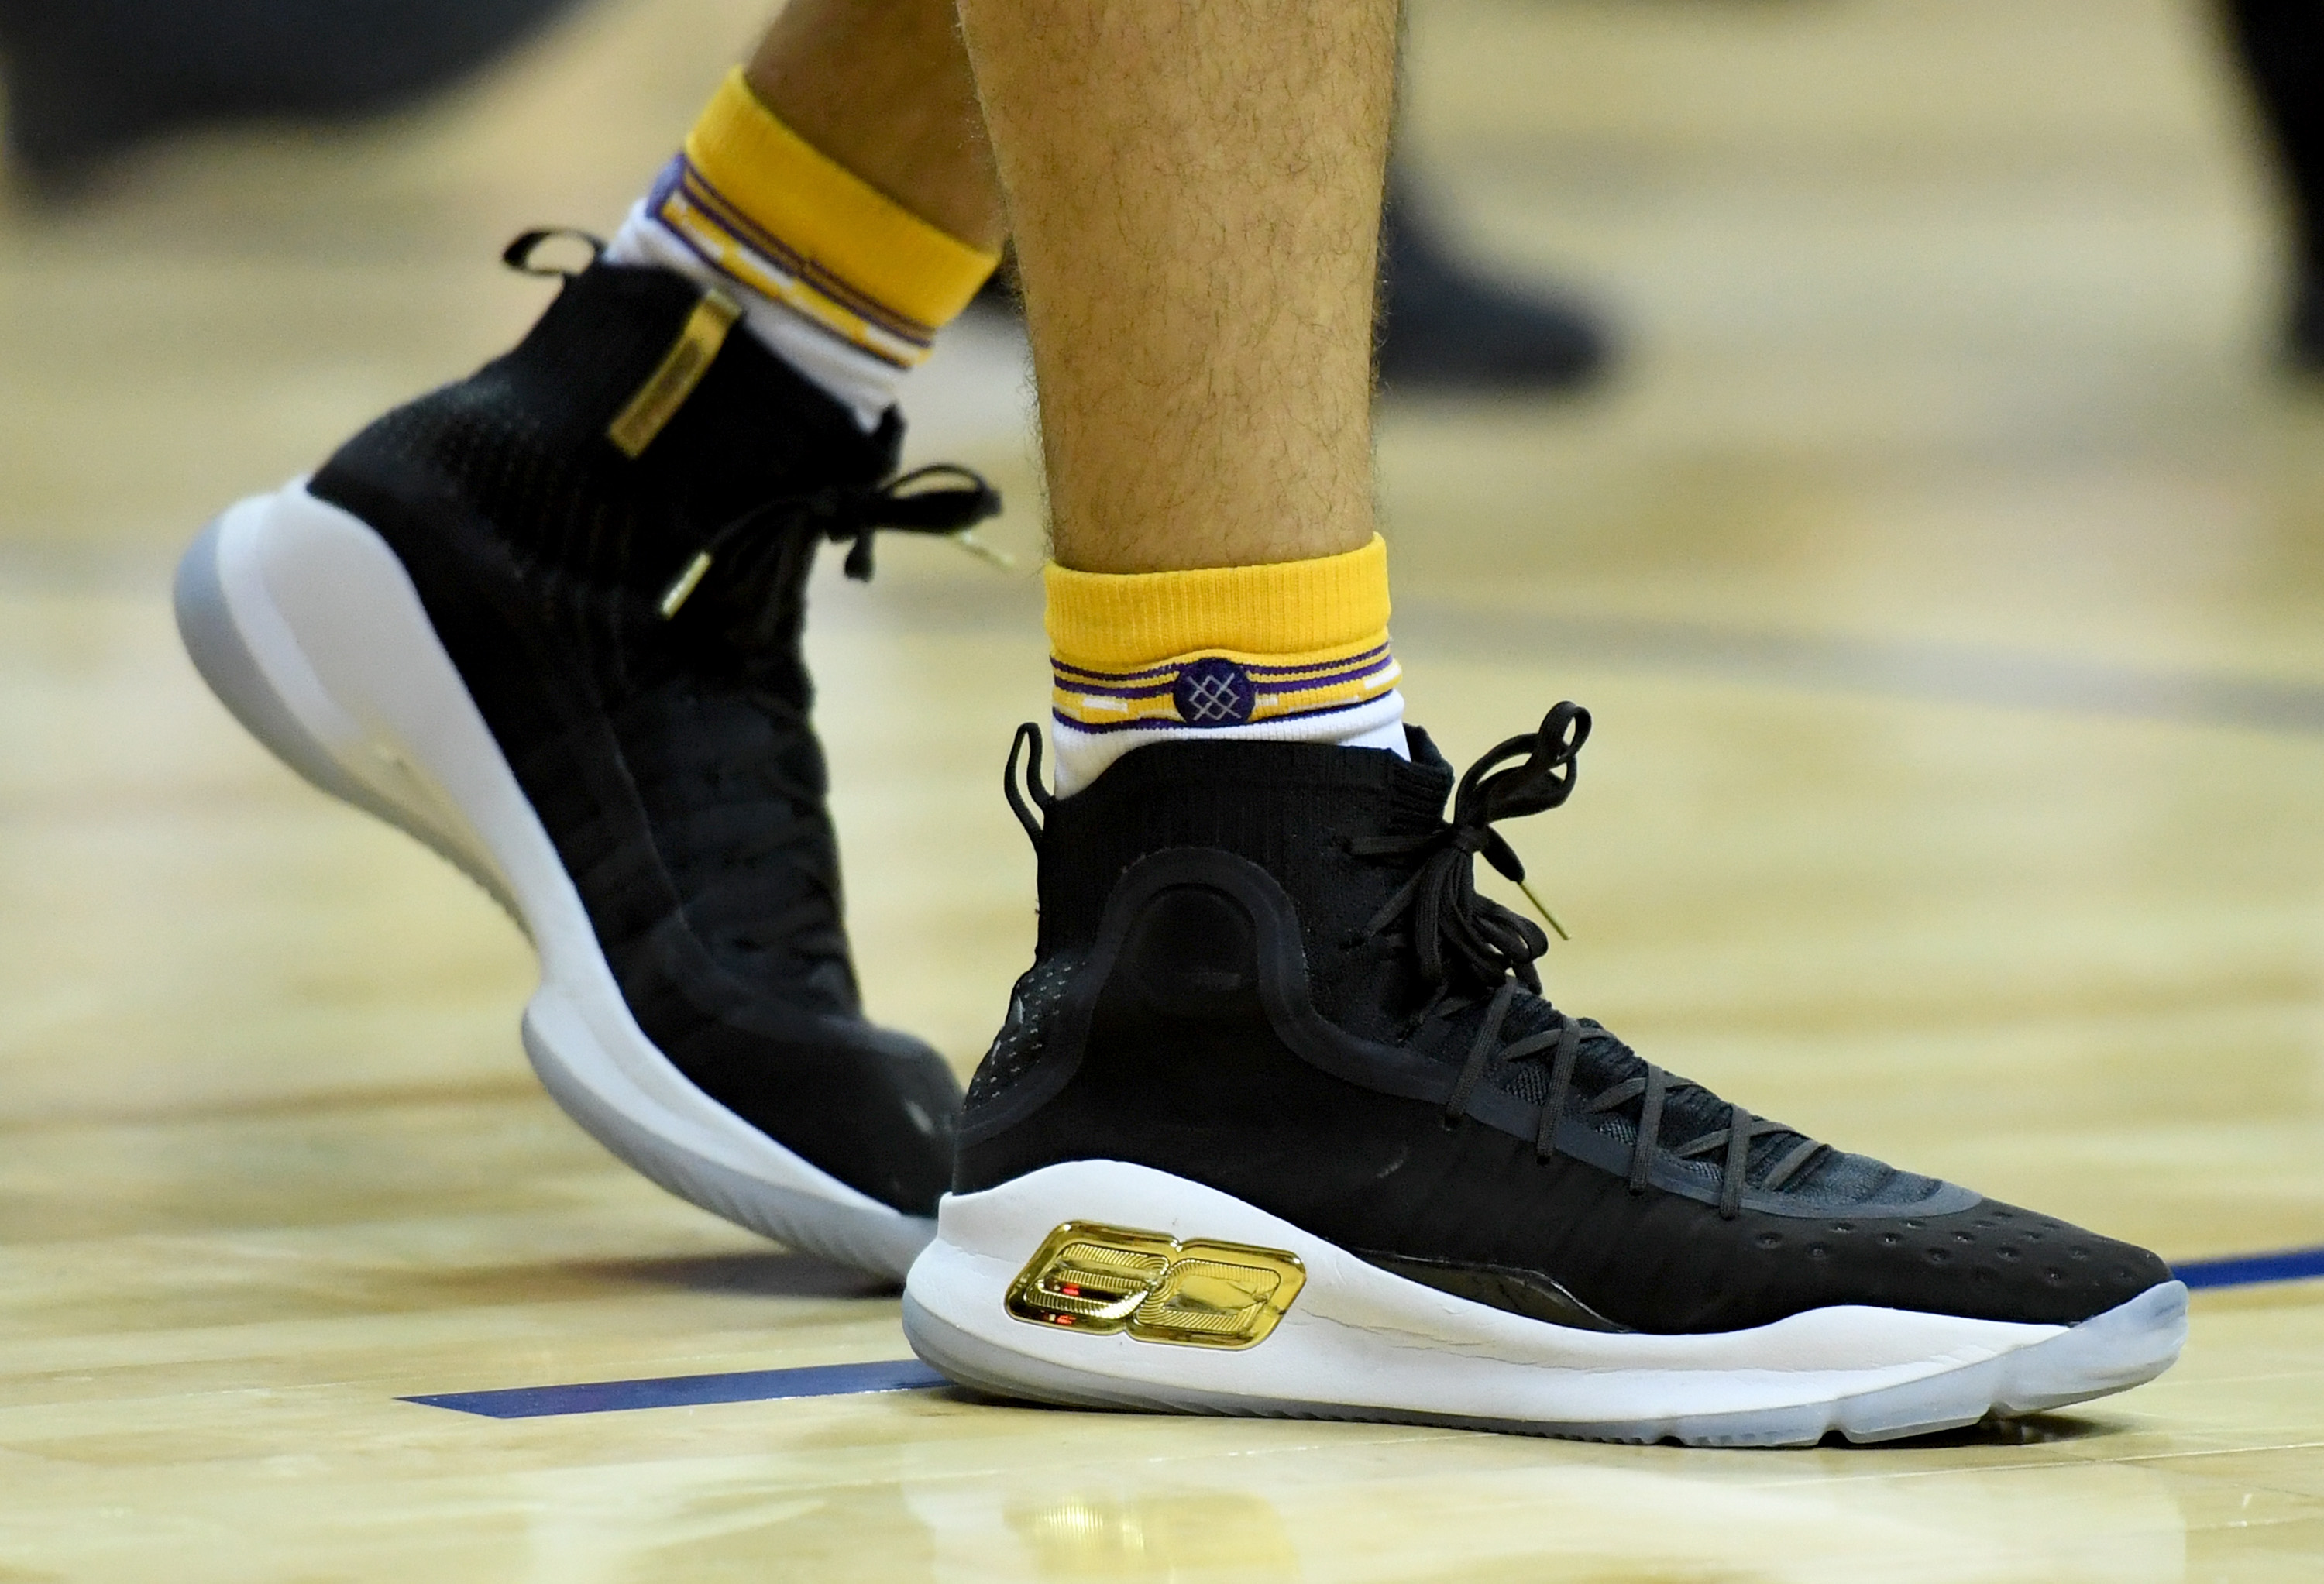 mus eller rotte Pensioneret band Lonzo Ball: It's gotta be the shoes! Adidas, Nike or BBB?